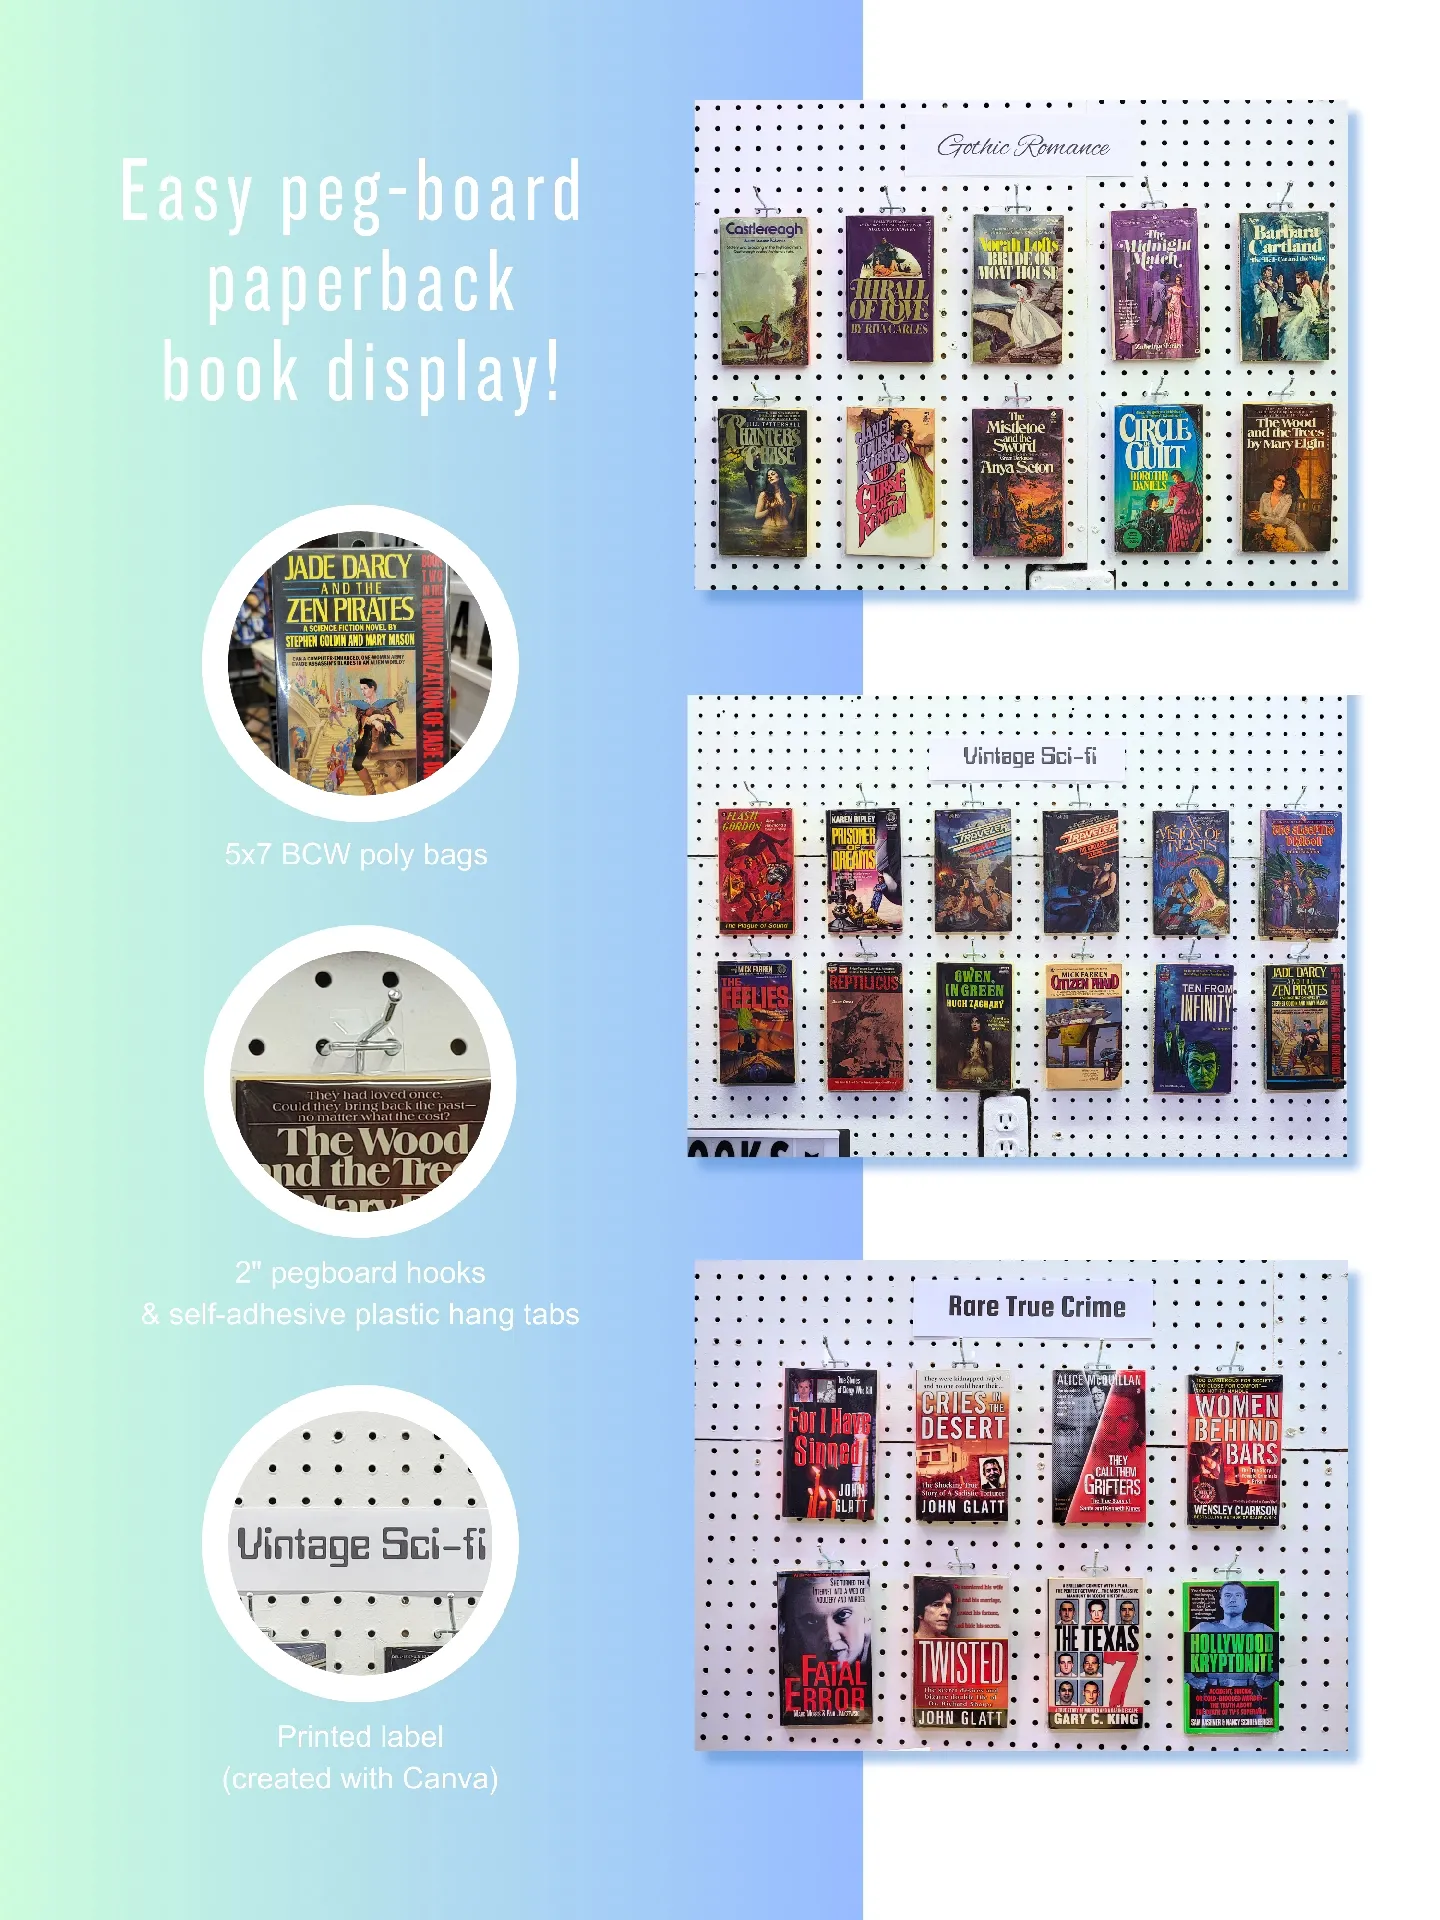 Bookmark holder, made from a disposed hardback novel with the